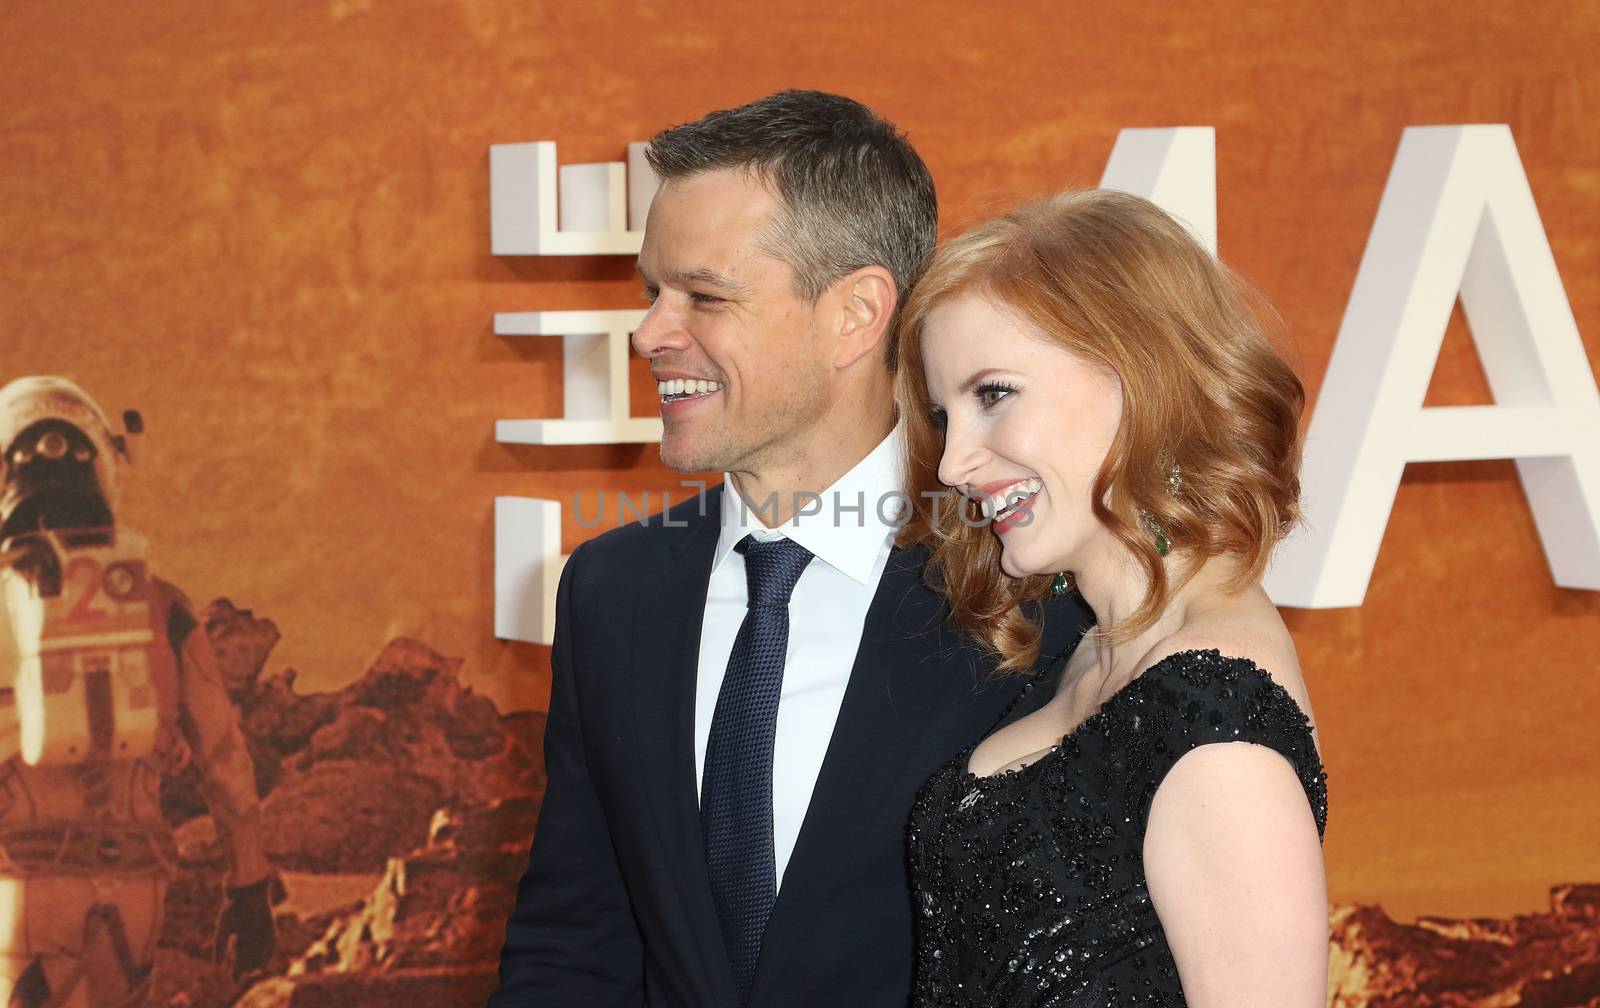 ENGLAND, London: Matt Damon and Jessica Chastain attend the European premiere of The Martian in Leicester Square in London, UK on September 24, 2015